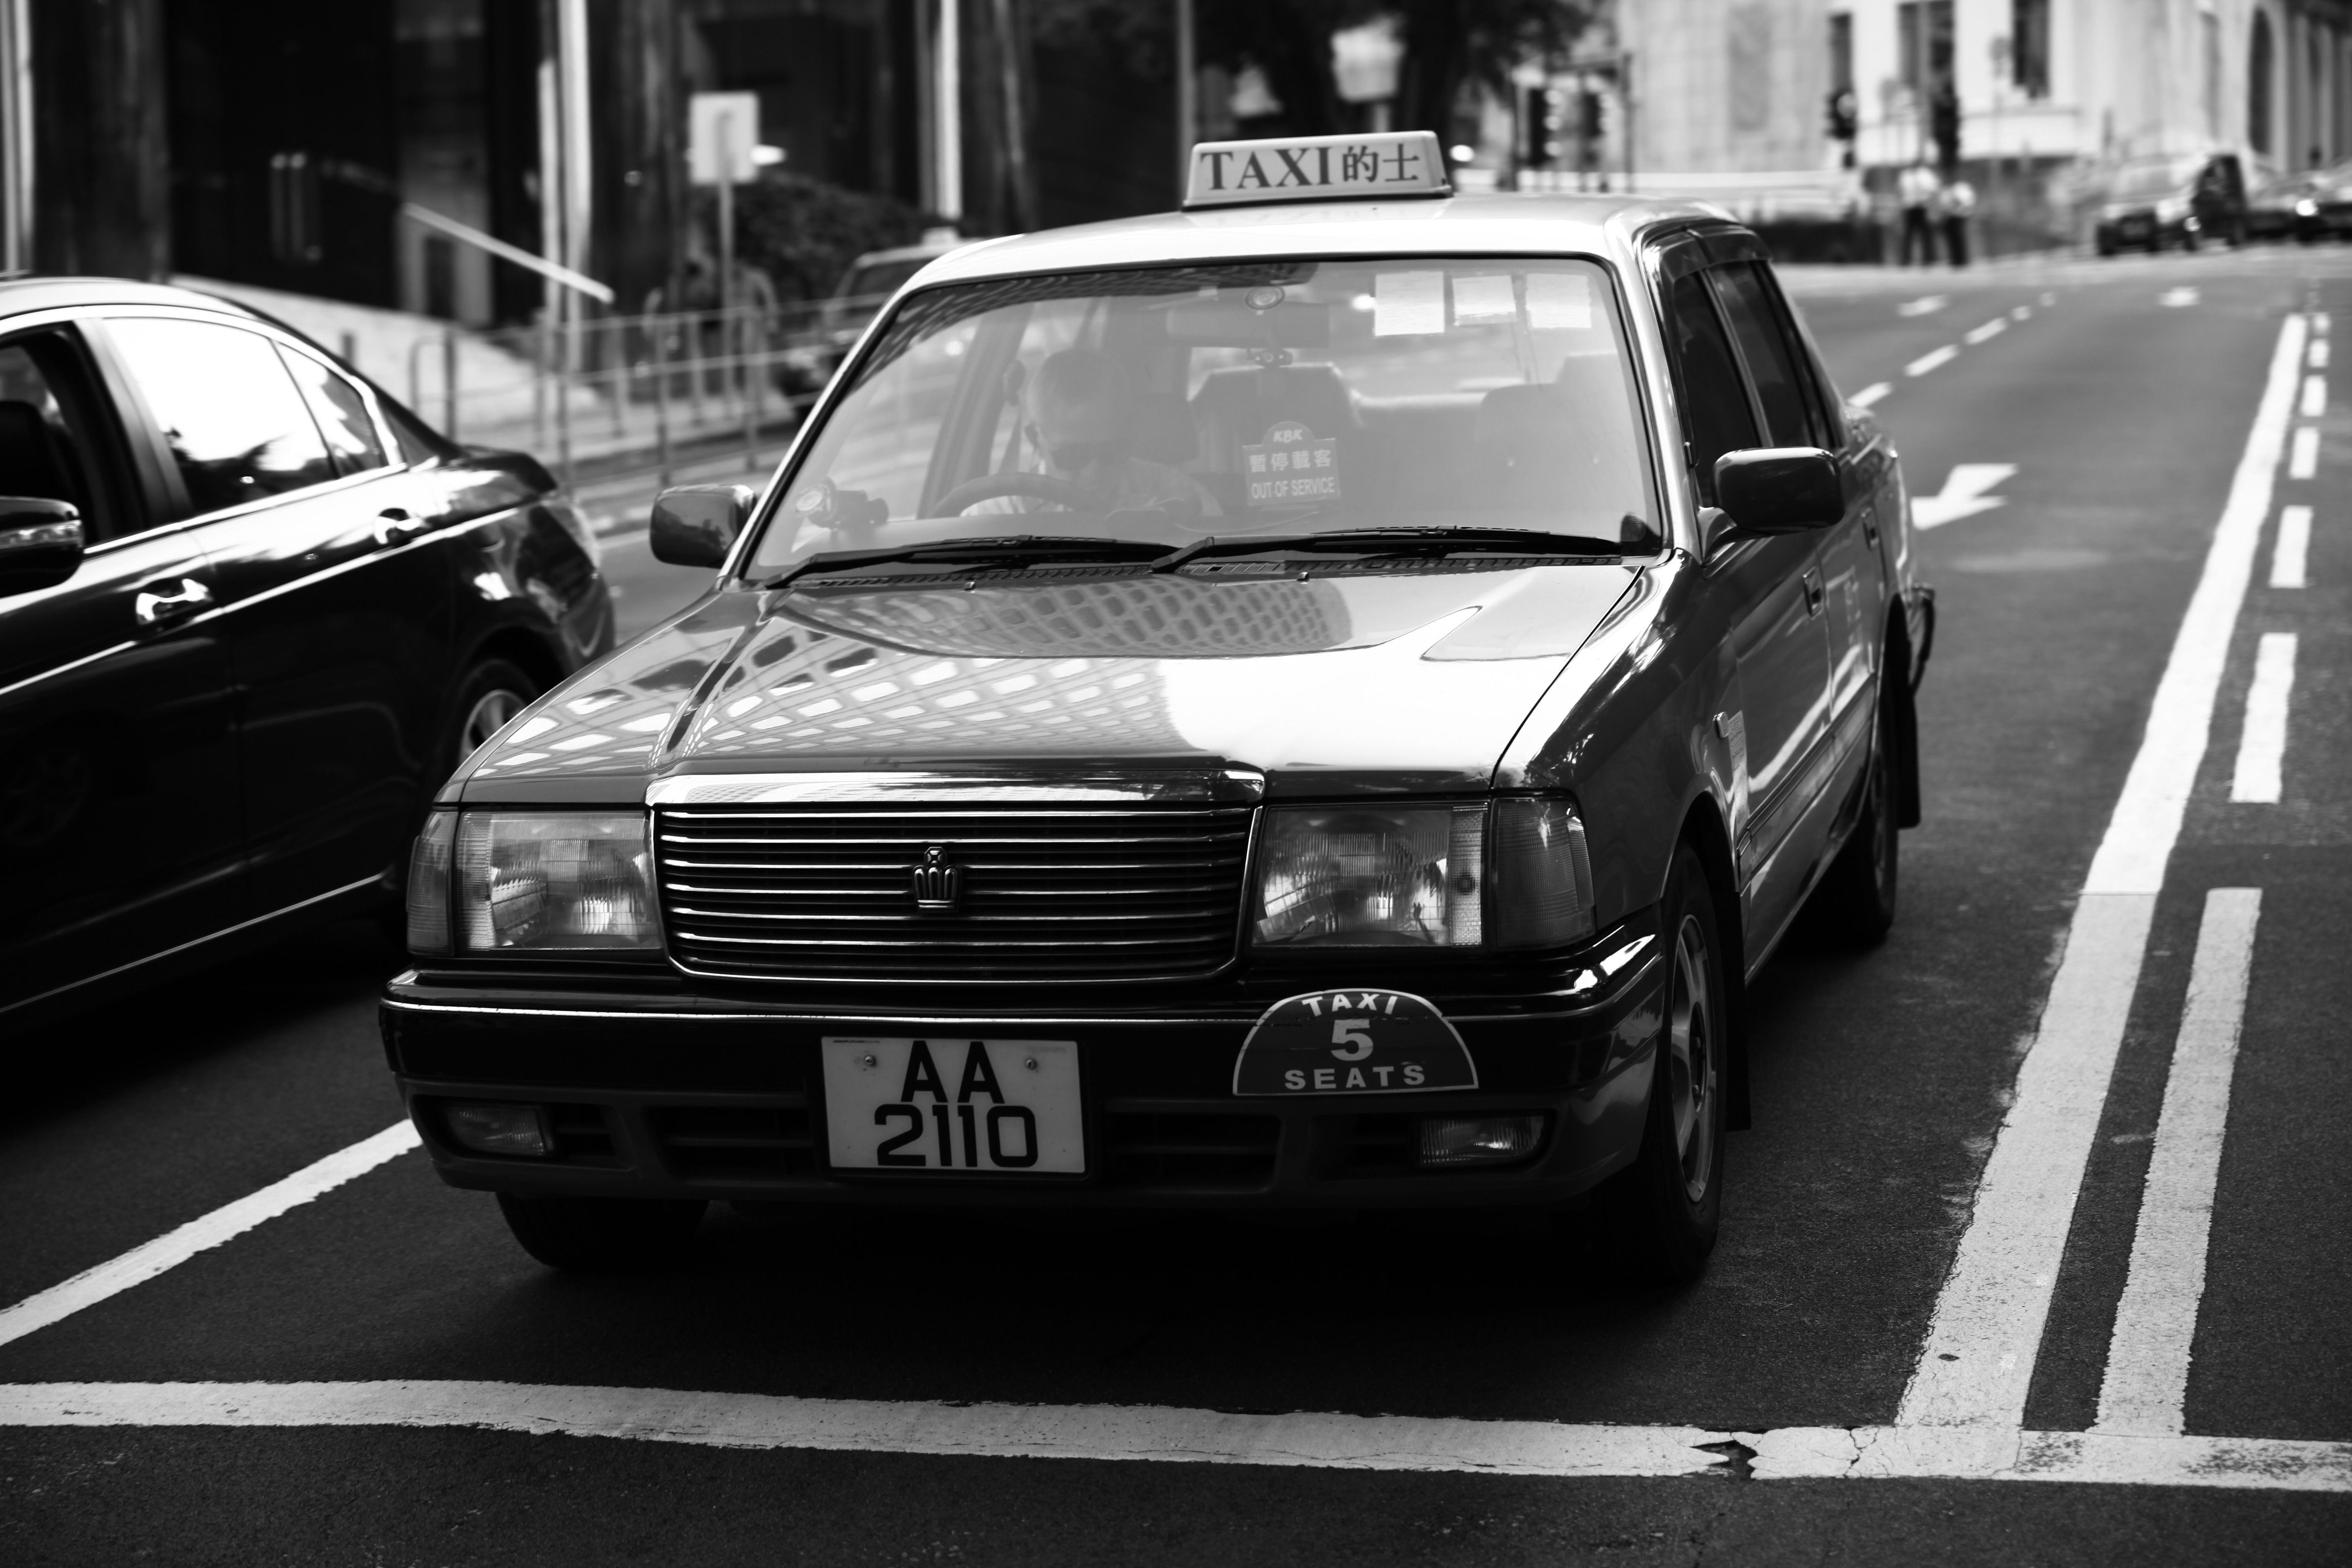 royalty free taxi image